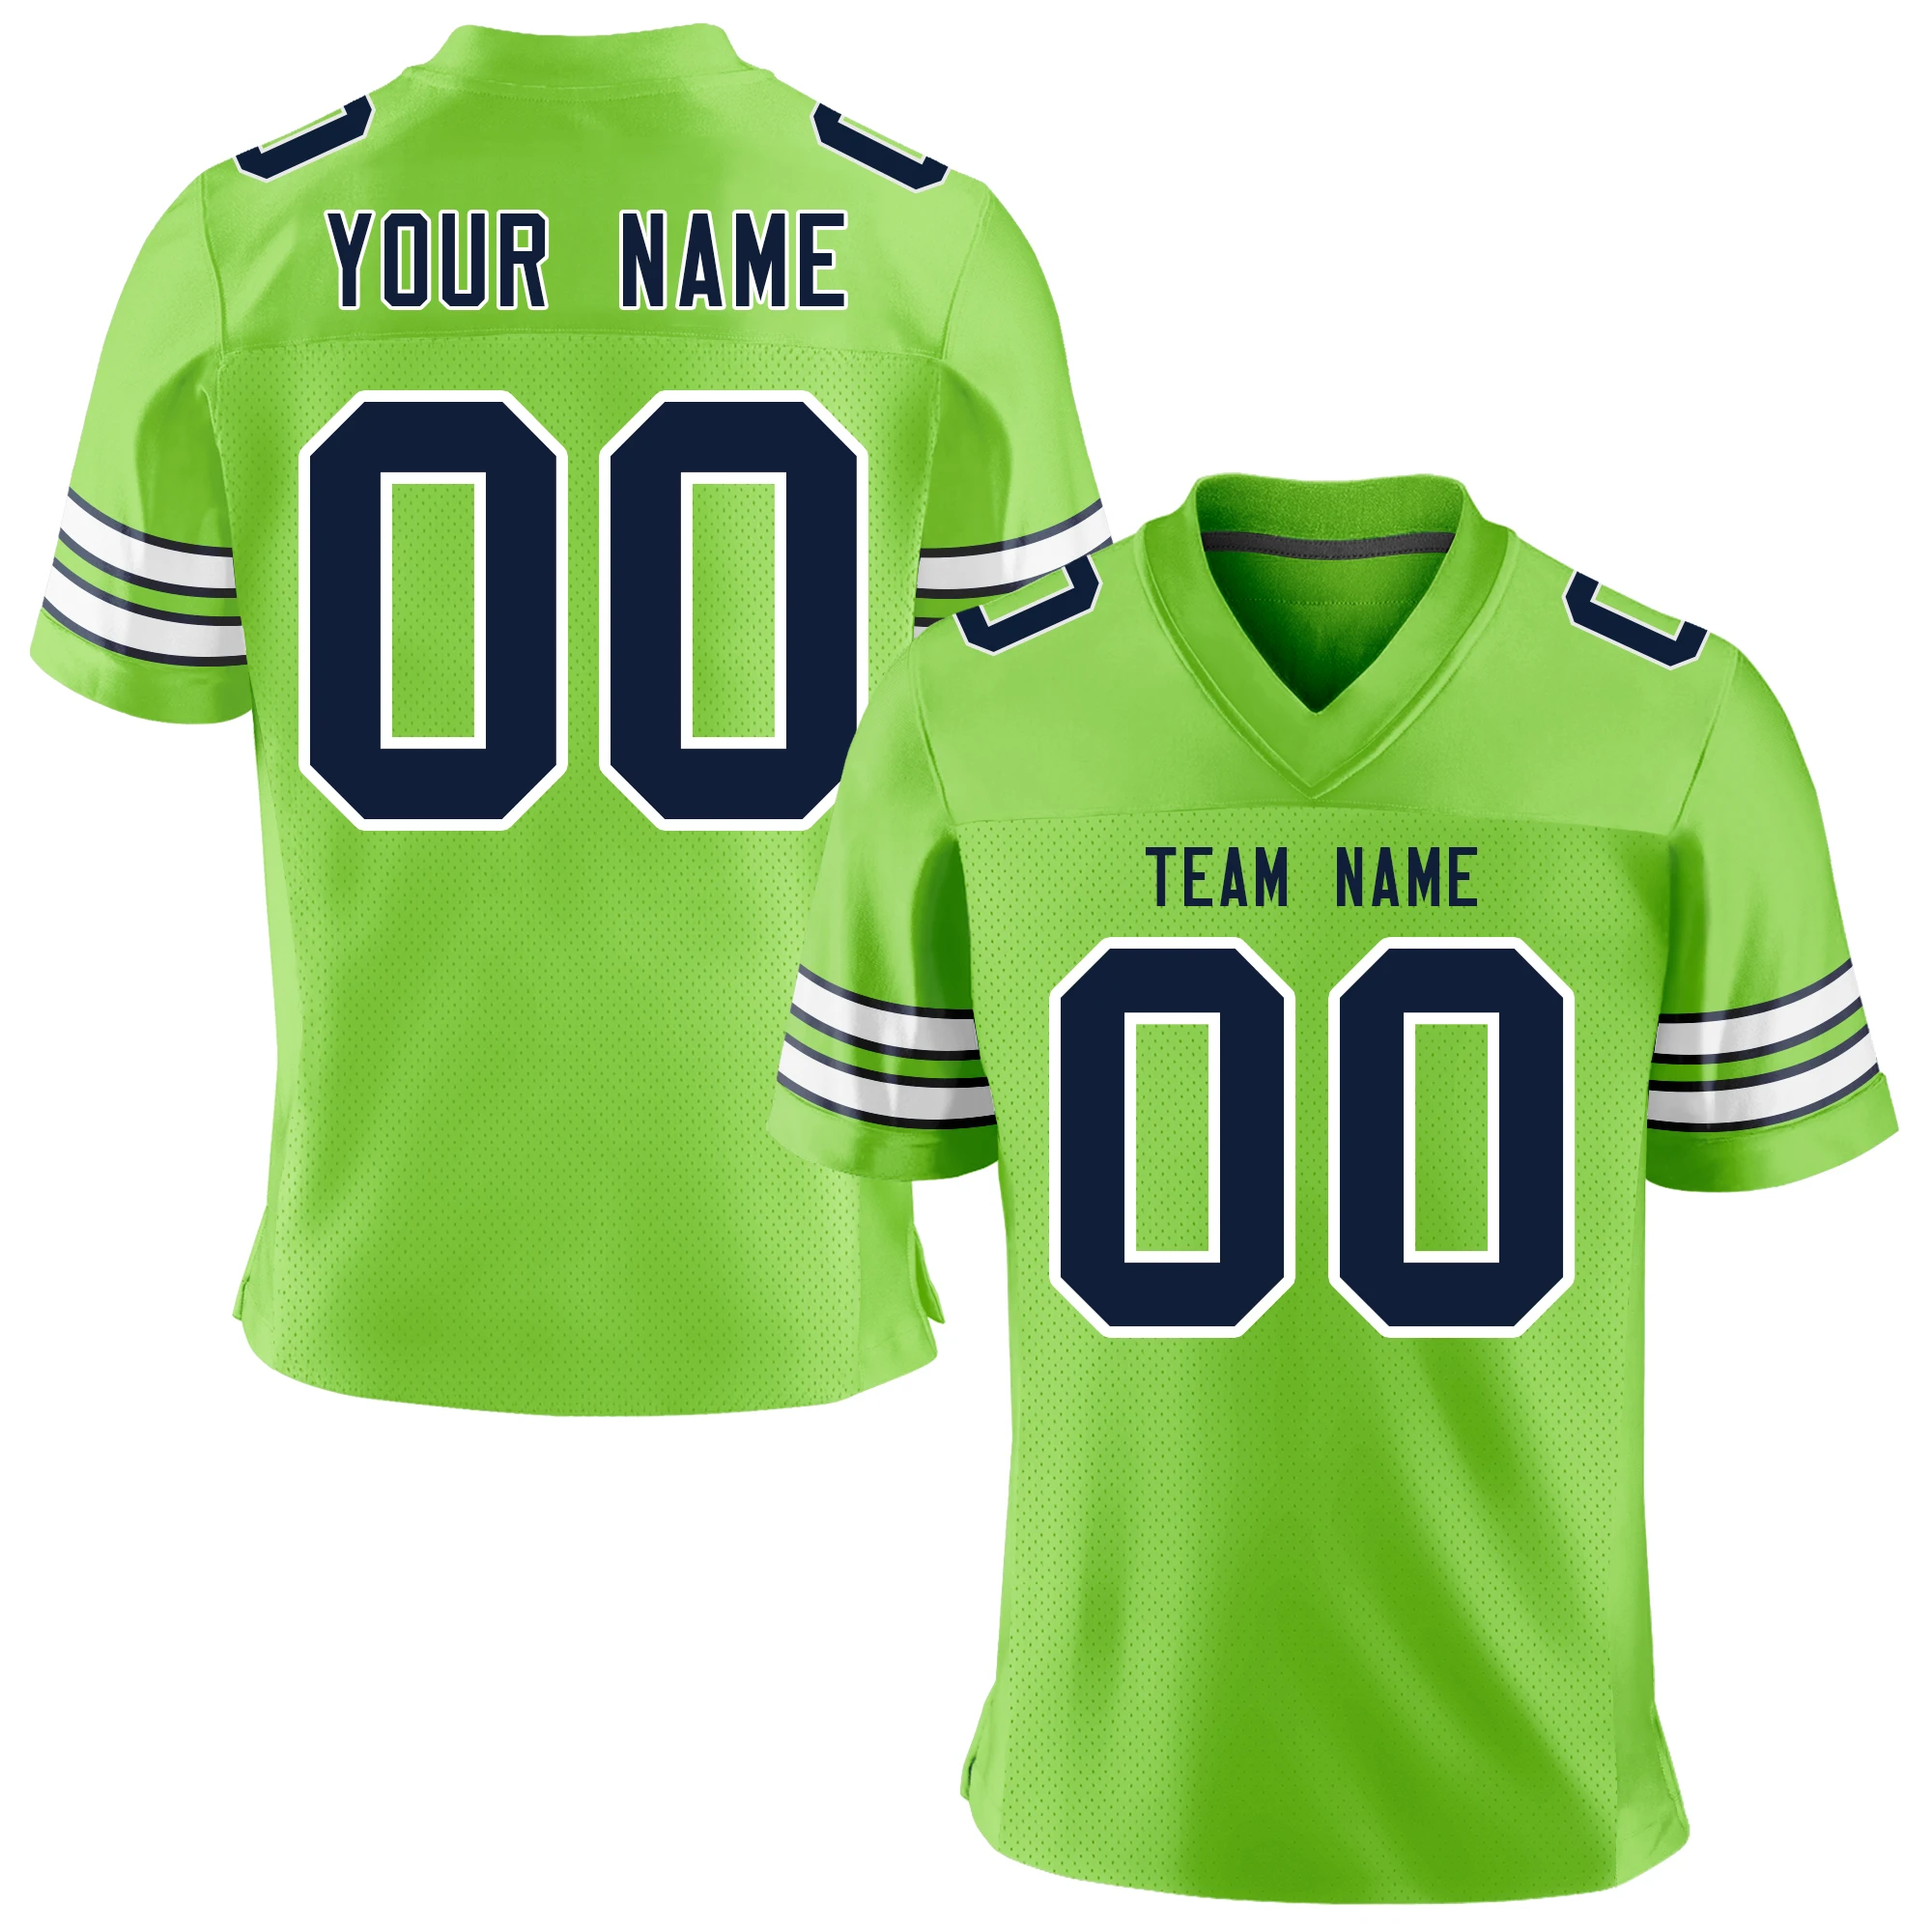 Custom Sublimated/stitched American Football Jersey Shirts Print  Personalized Team Name And Number For Men/women/kids - American Football  Jerseys - AliExpress